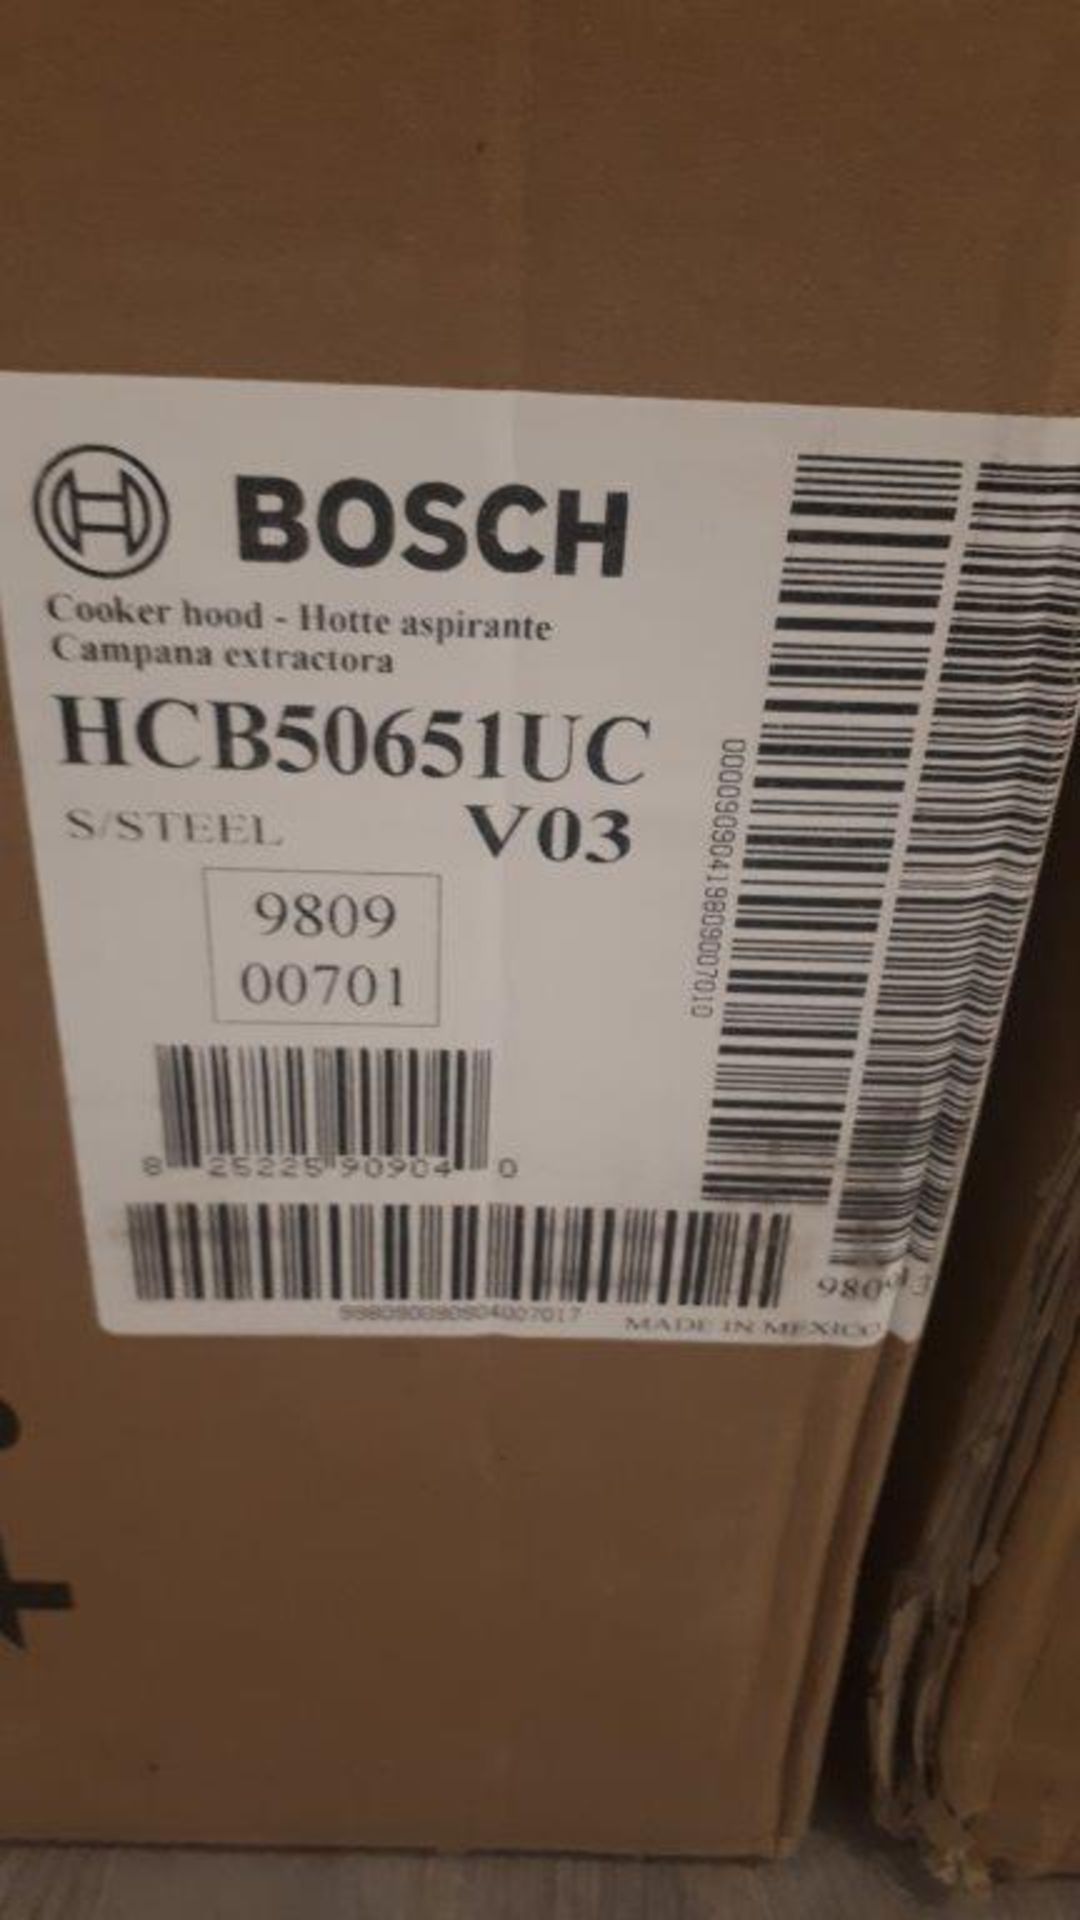 Bosch HCB50651UC 30” stainless steel wall mount chimney range hood - Image 4 of 4